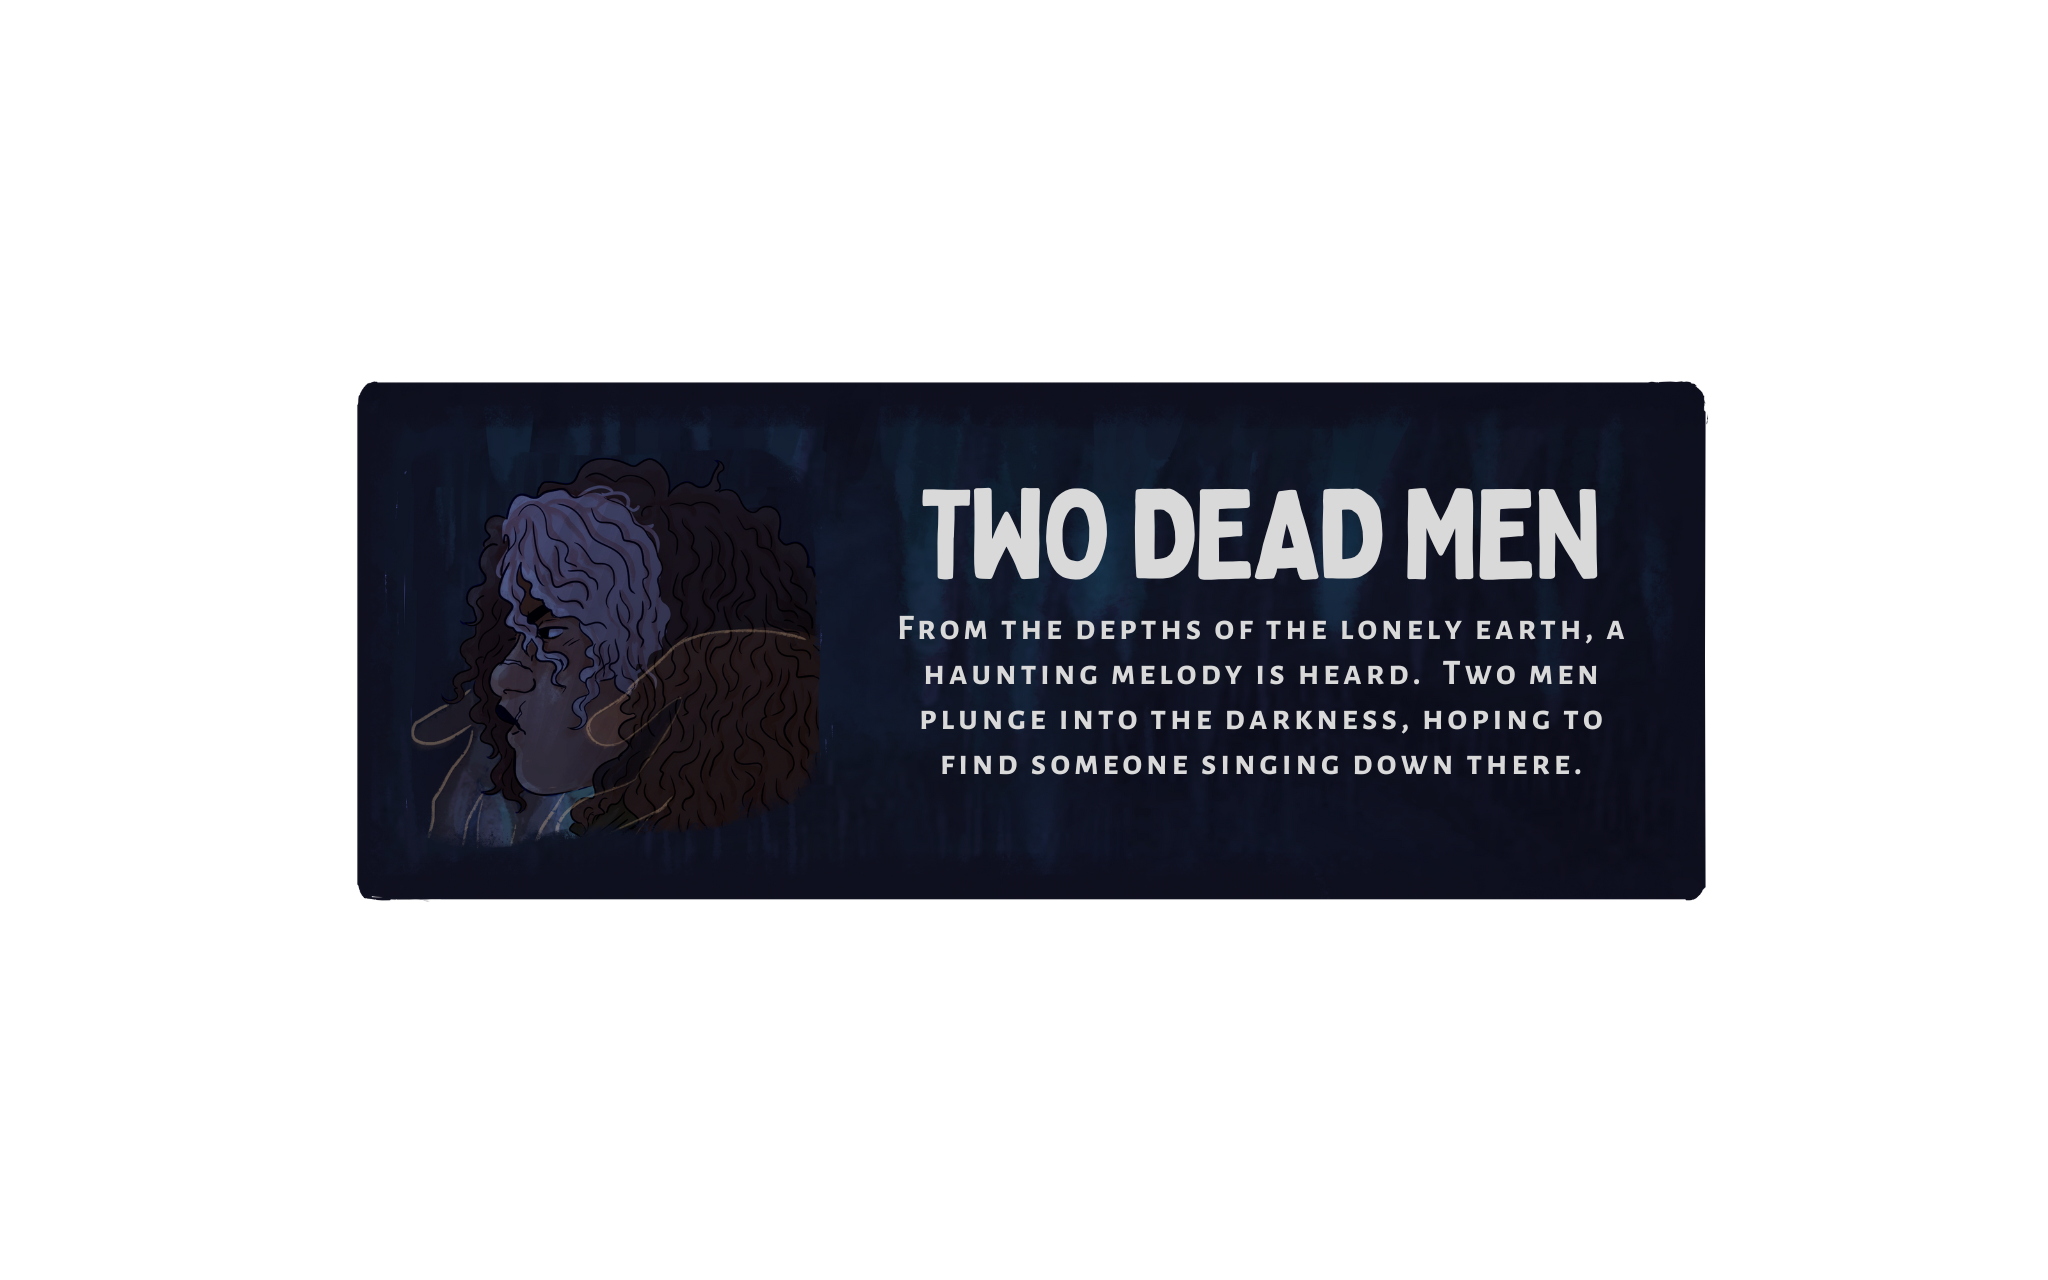 TWO DEAD MEN [ONGOING]